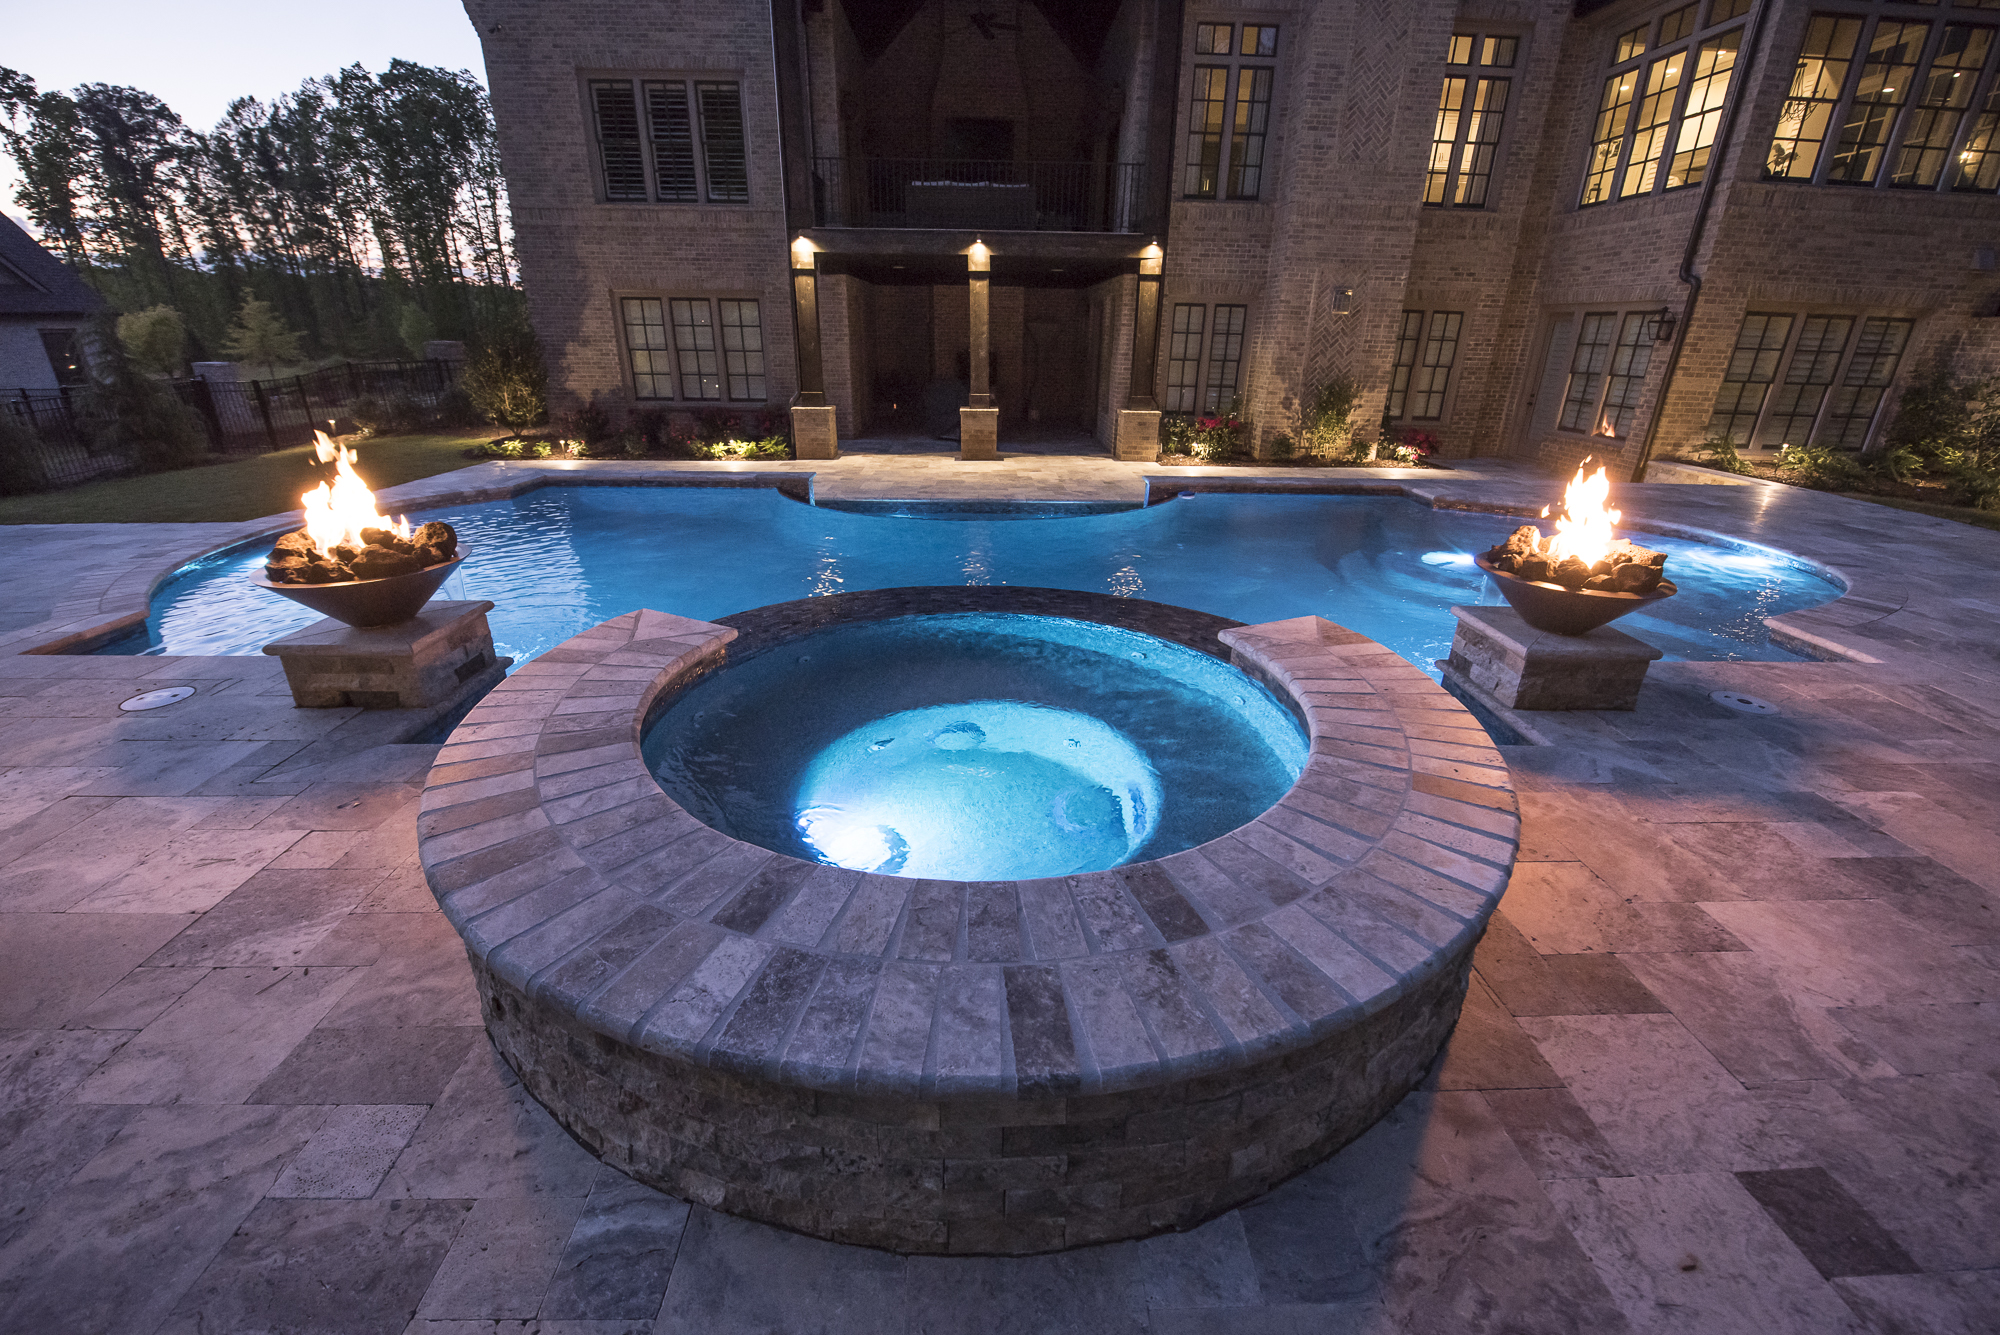 A mesmerizing pool surrounded by stone columns adorned with fire bowls, casting a warm and enchanting glow over the tranquil waters.